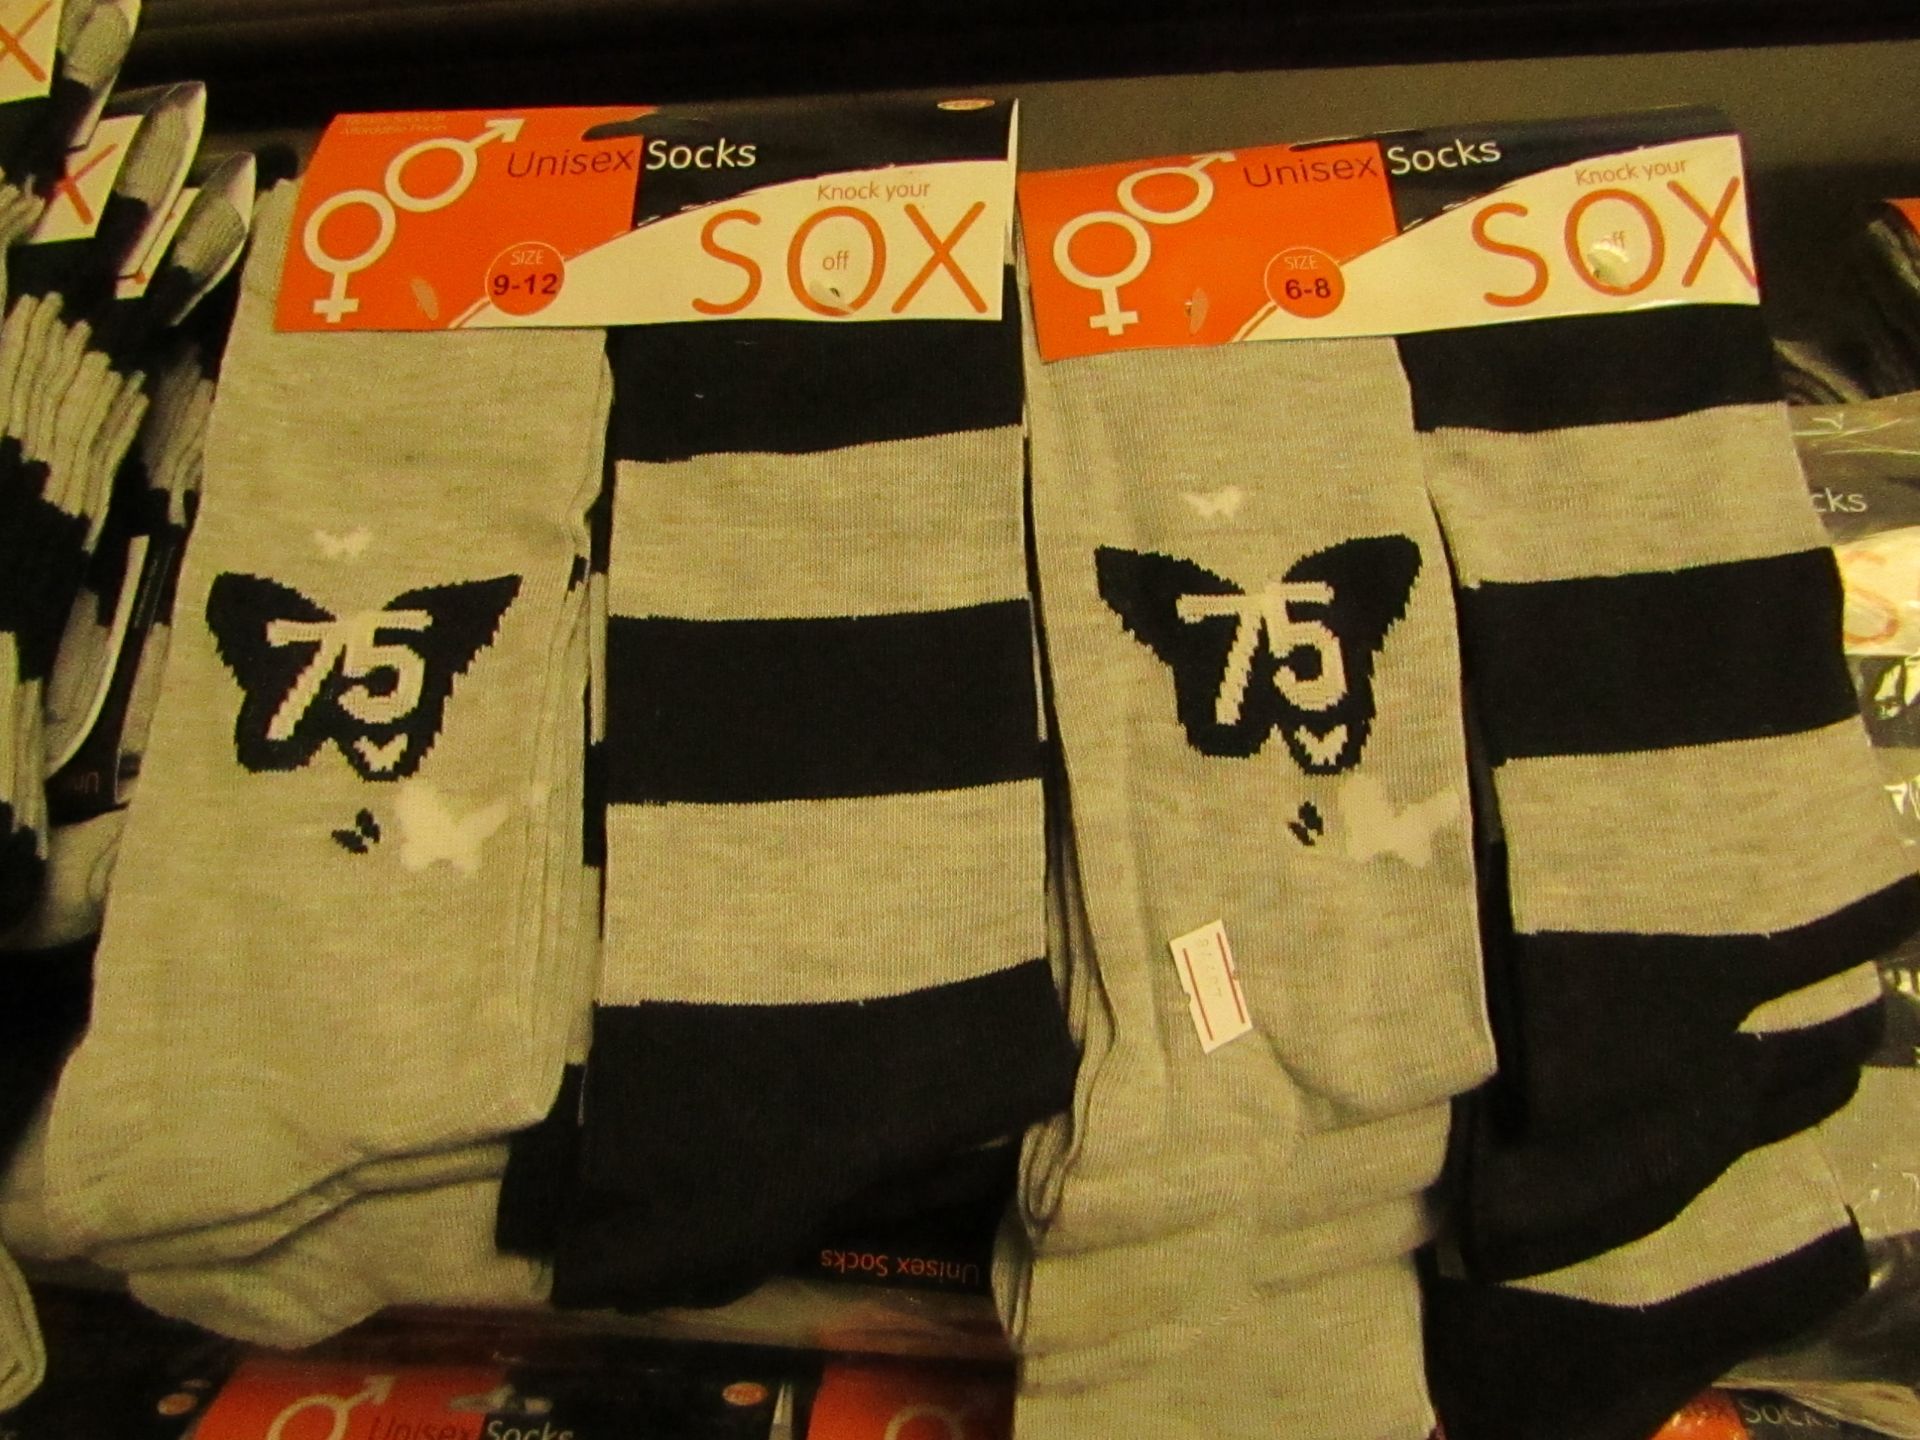 48 Pairs of Unisex Adult Socks Sizes 6-8 & 9-12 New & Packaged